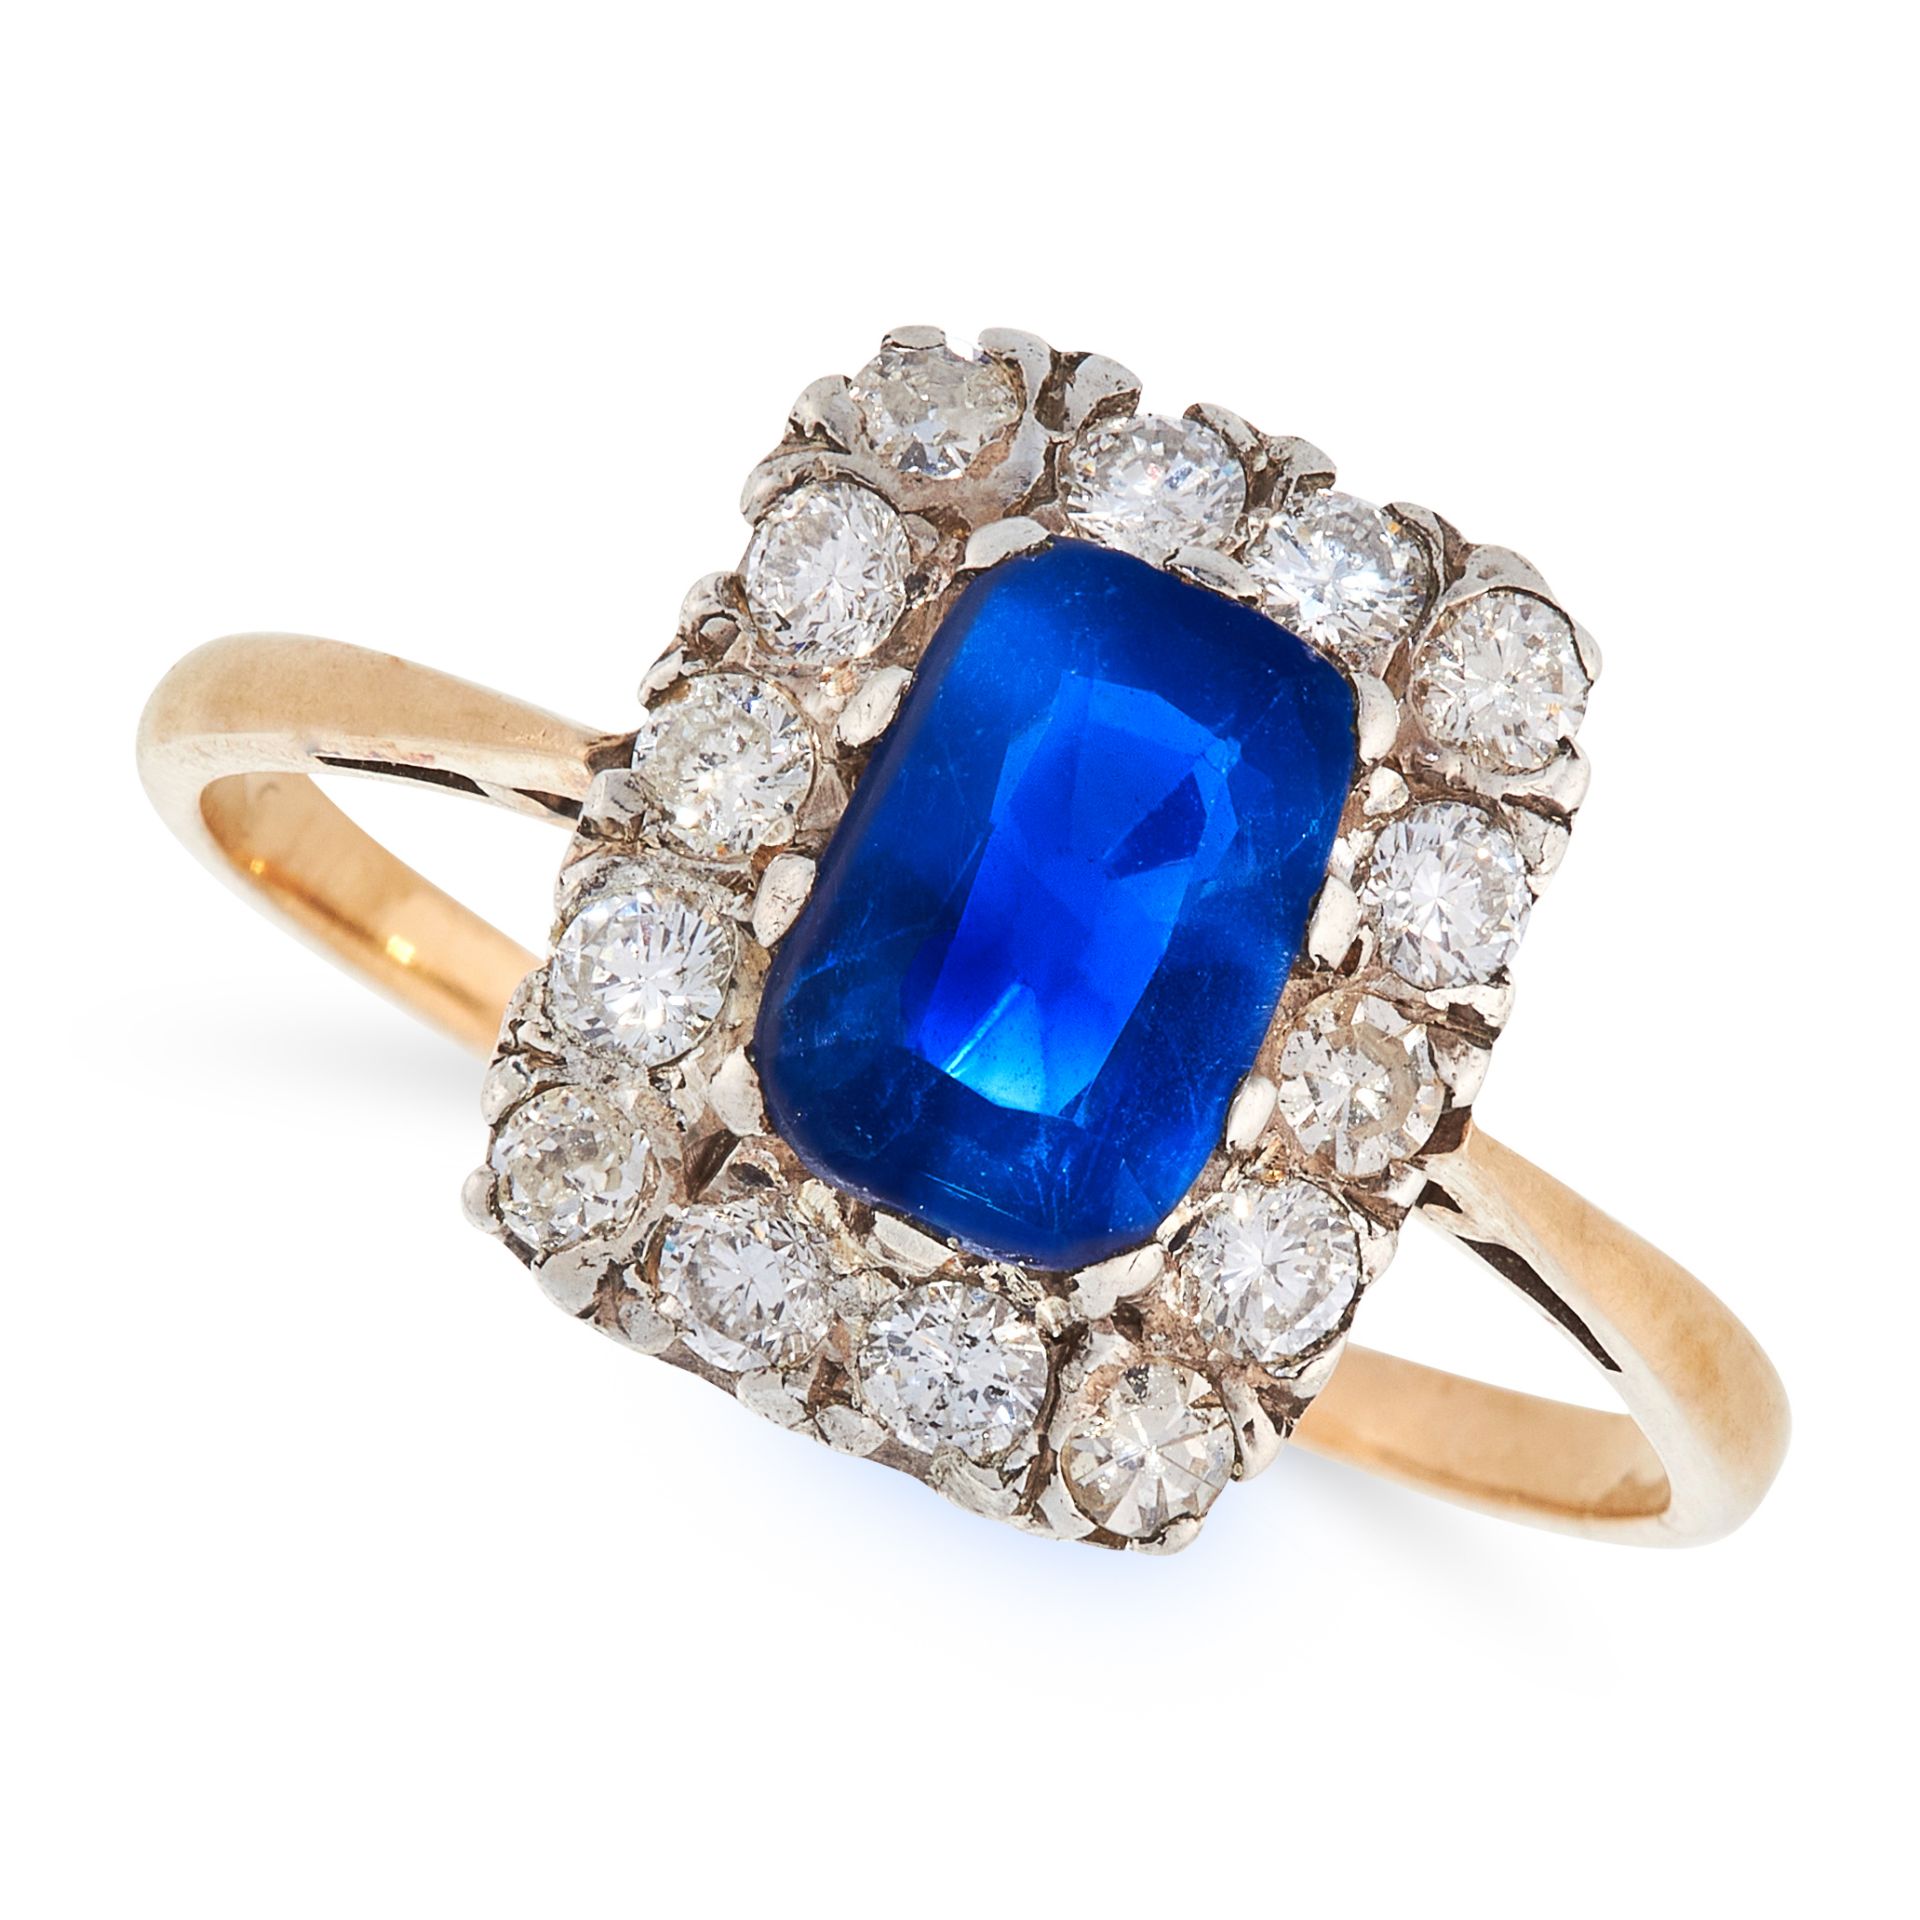 A SAPPHIRE AND DIAMOND DRESS RING in high carat yellow gold, set with a cushion cut blue sapphire of